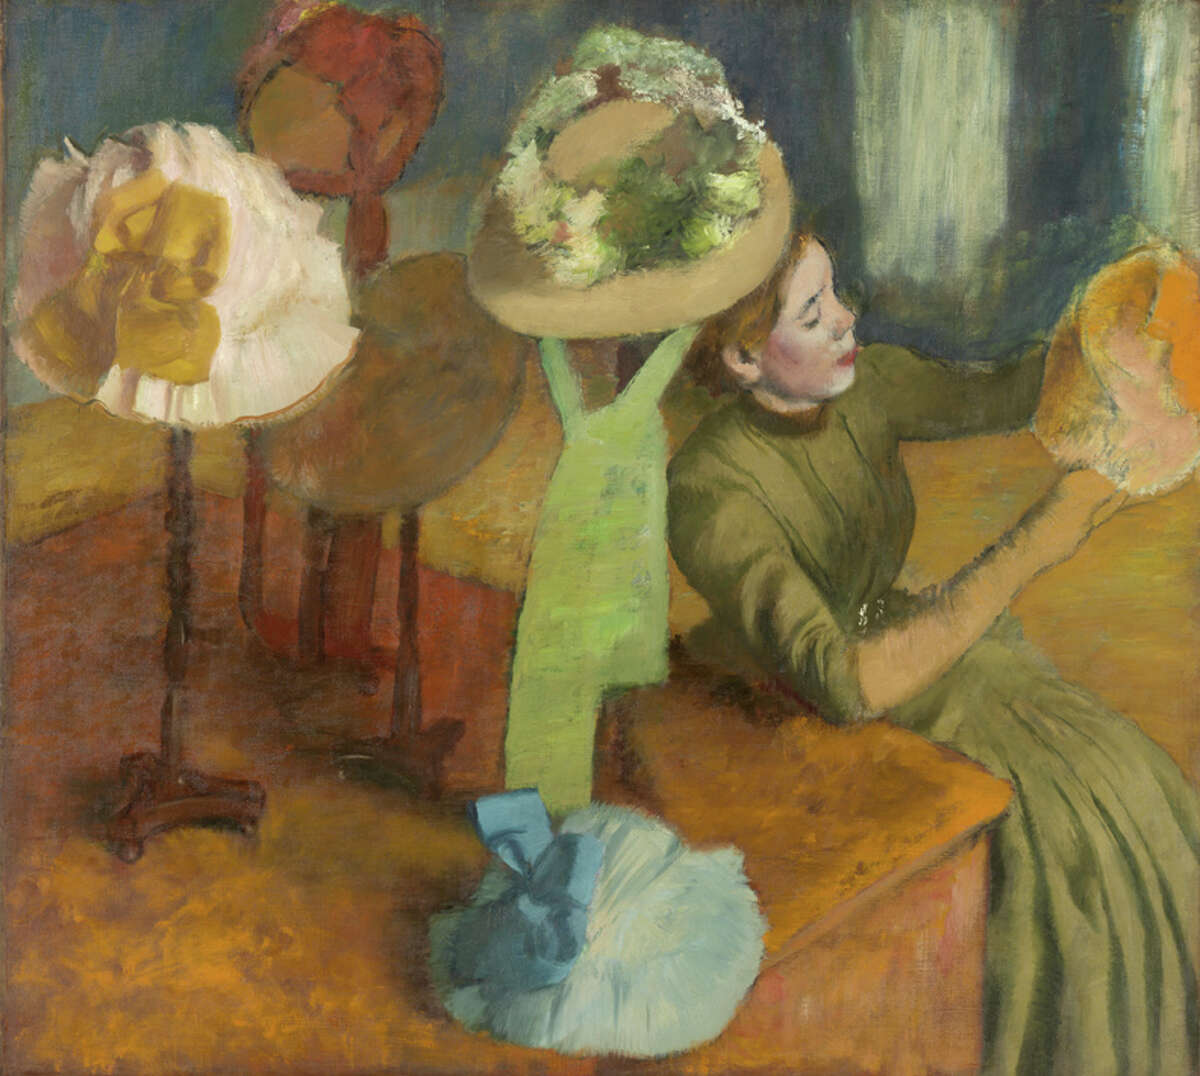 Edgar Degas, 1834-1917; “The Millinery Shop”, 1879-1886; oil on canvas; 39 3/8 x 49 9/16 inches.